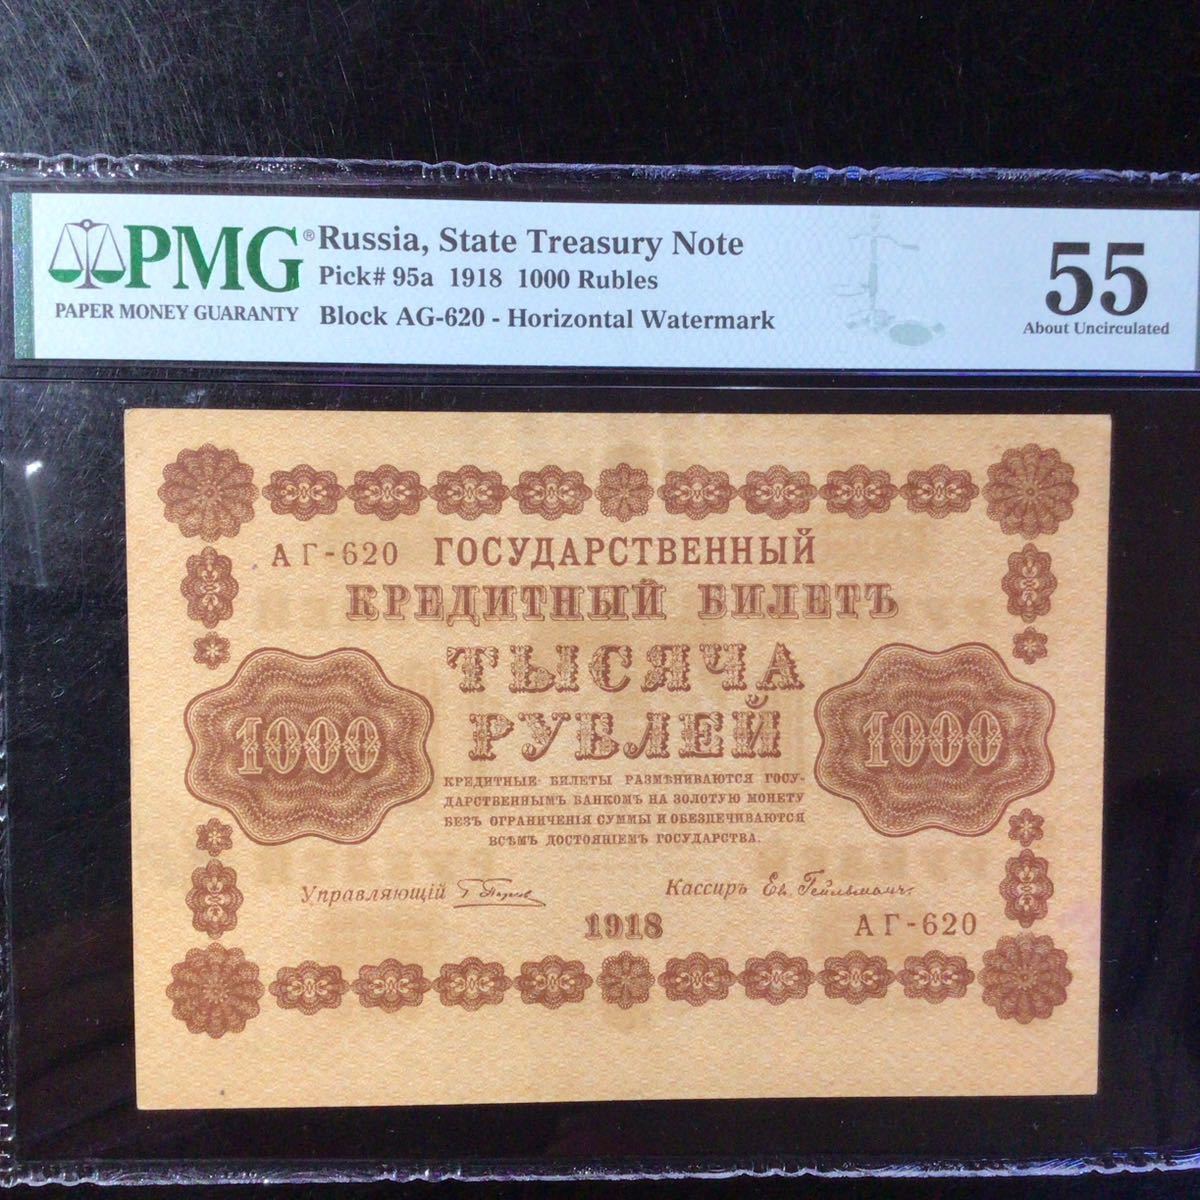 World Banknote Grading RUSSIA《State Treasury Note》1000 Rubles【1918】『PMG Grading About Uncirculated 55』